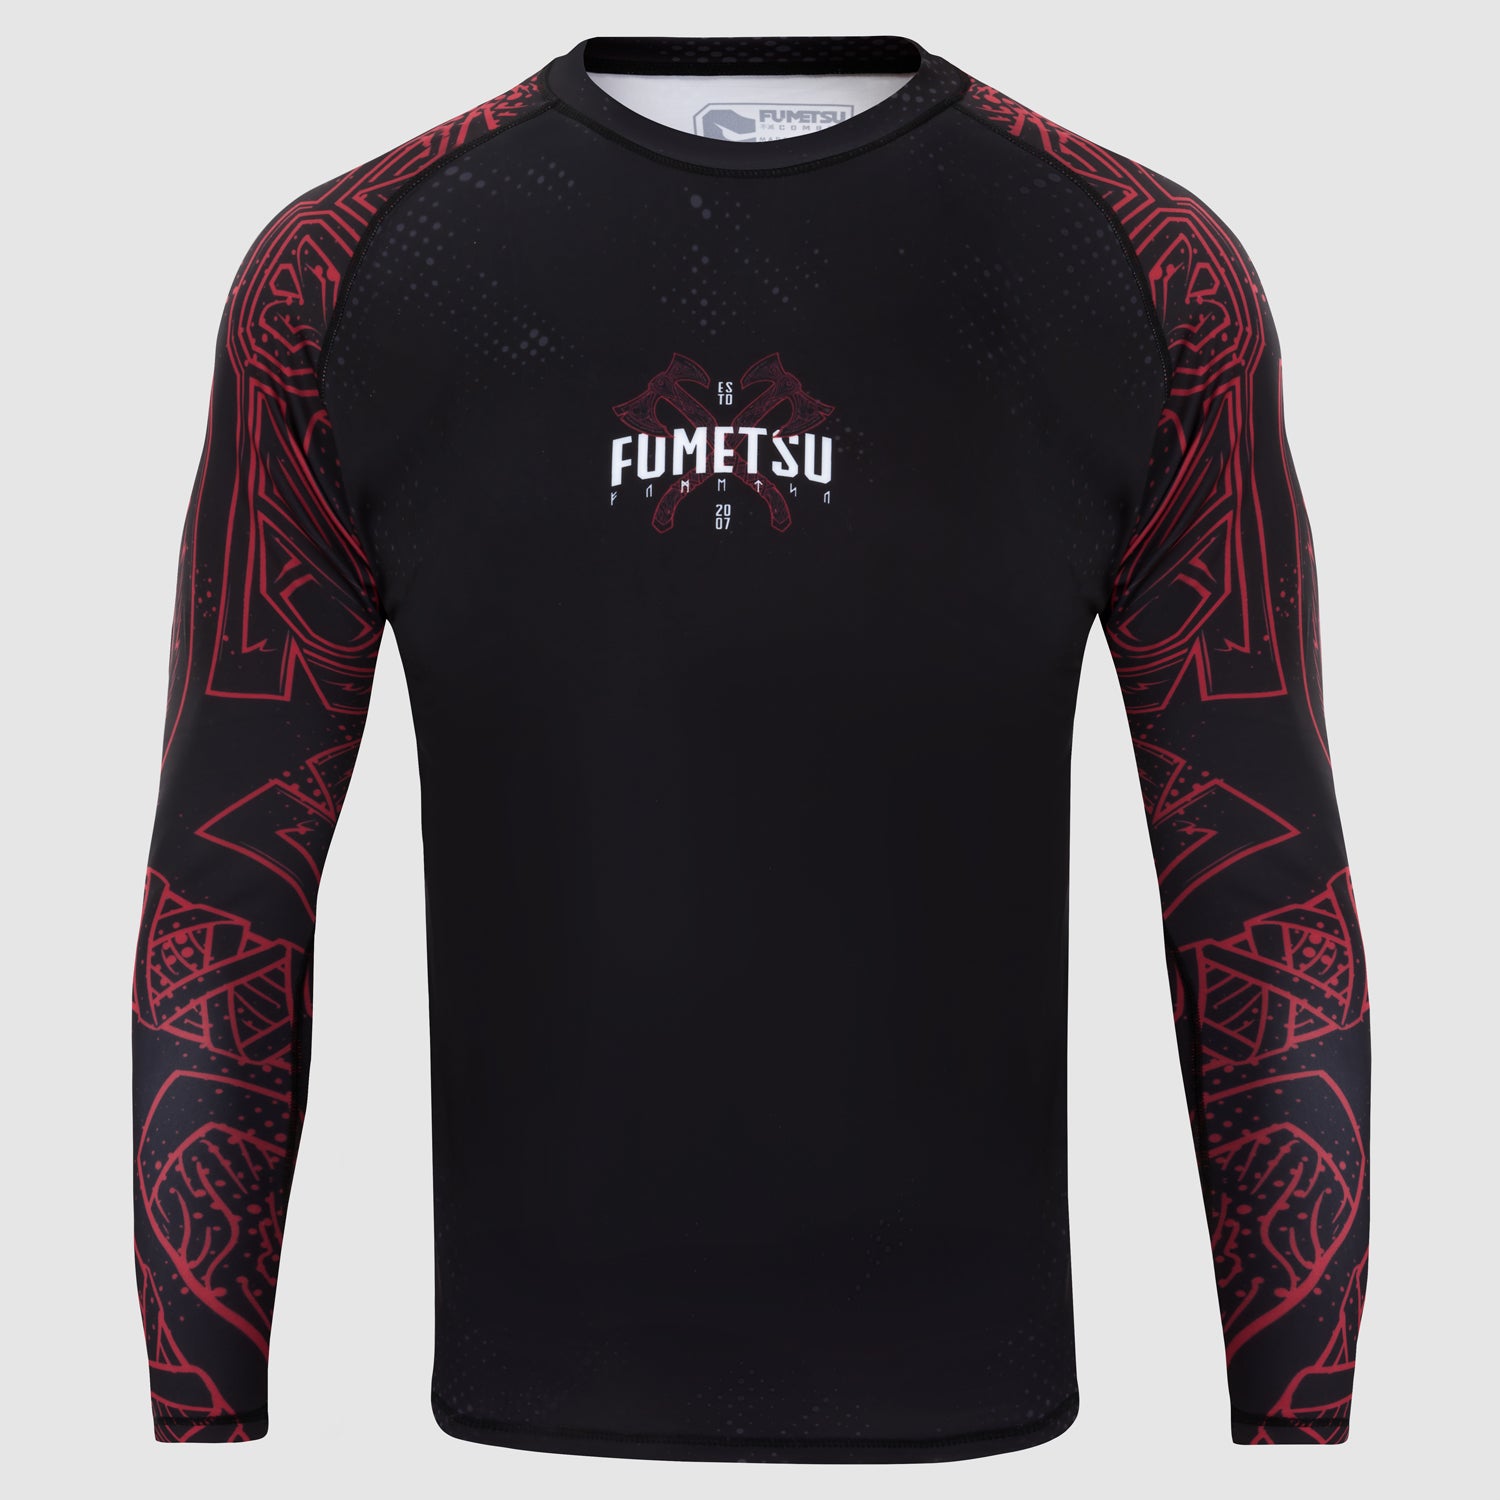 MMA Rashguards from Made4Fighters